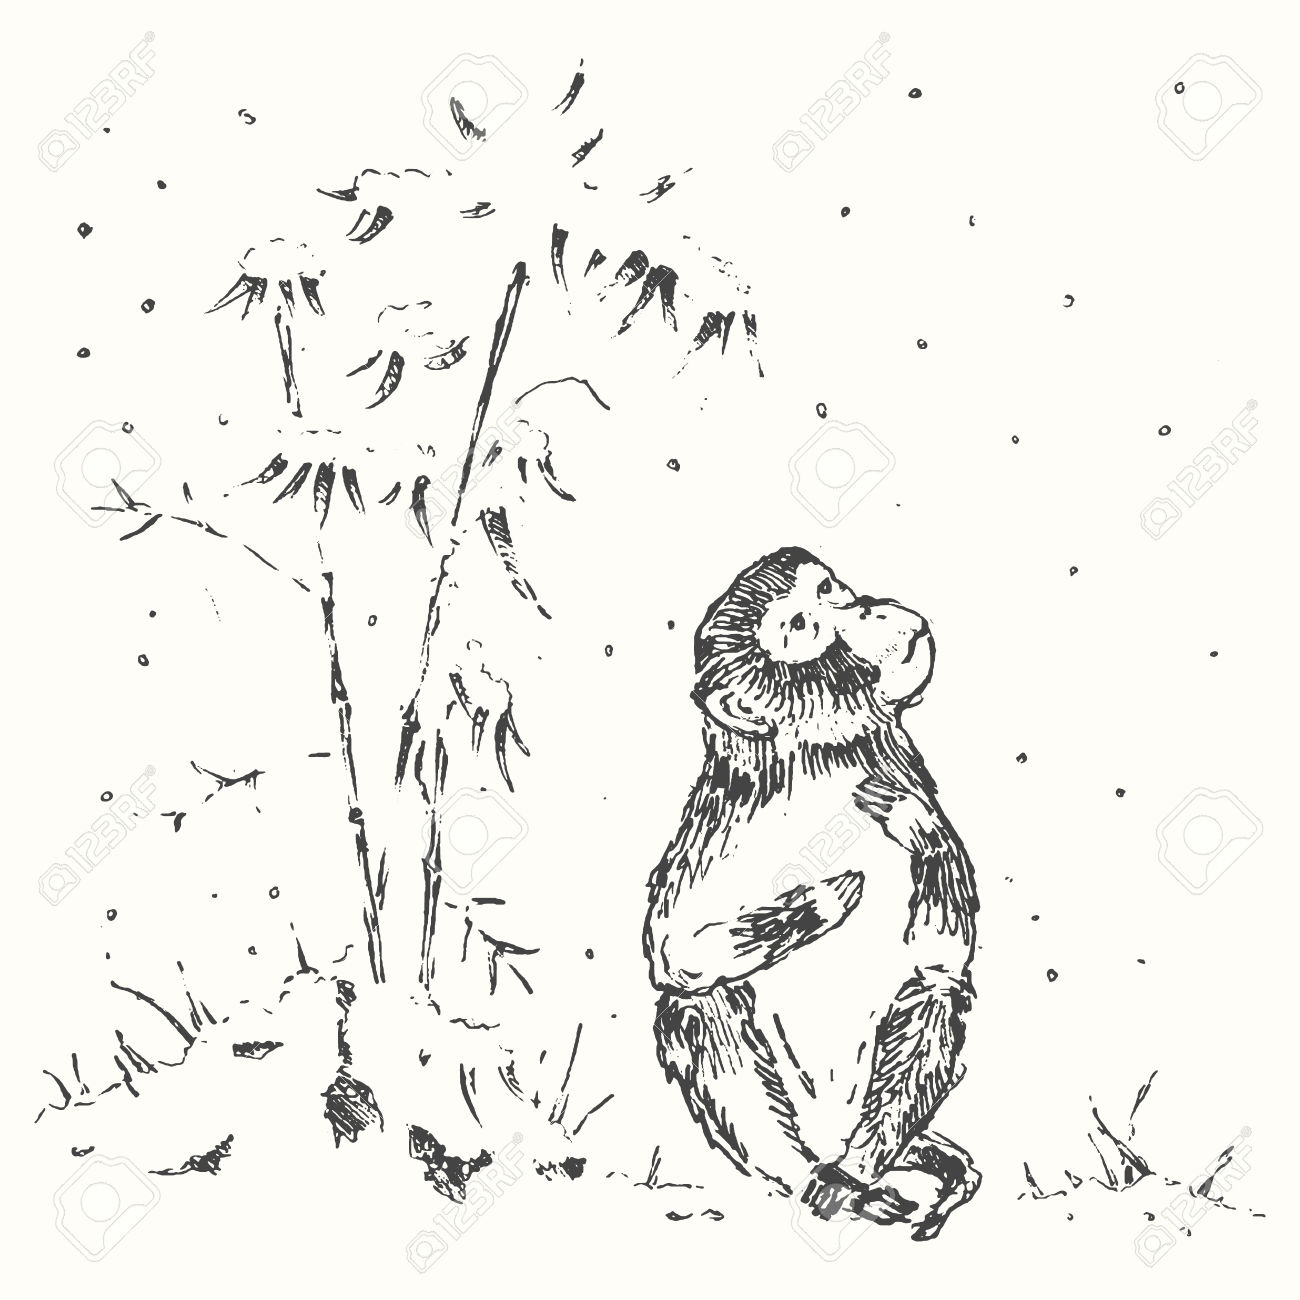 47840317-Traditional-Chinese-illustration-of-monkey-with-bamboo-and-snow-monkey-year-greeting-card-Chinese-zo-Stock-Vector.jpg